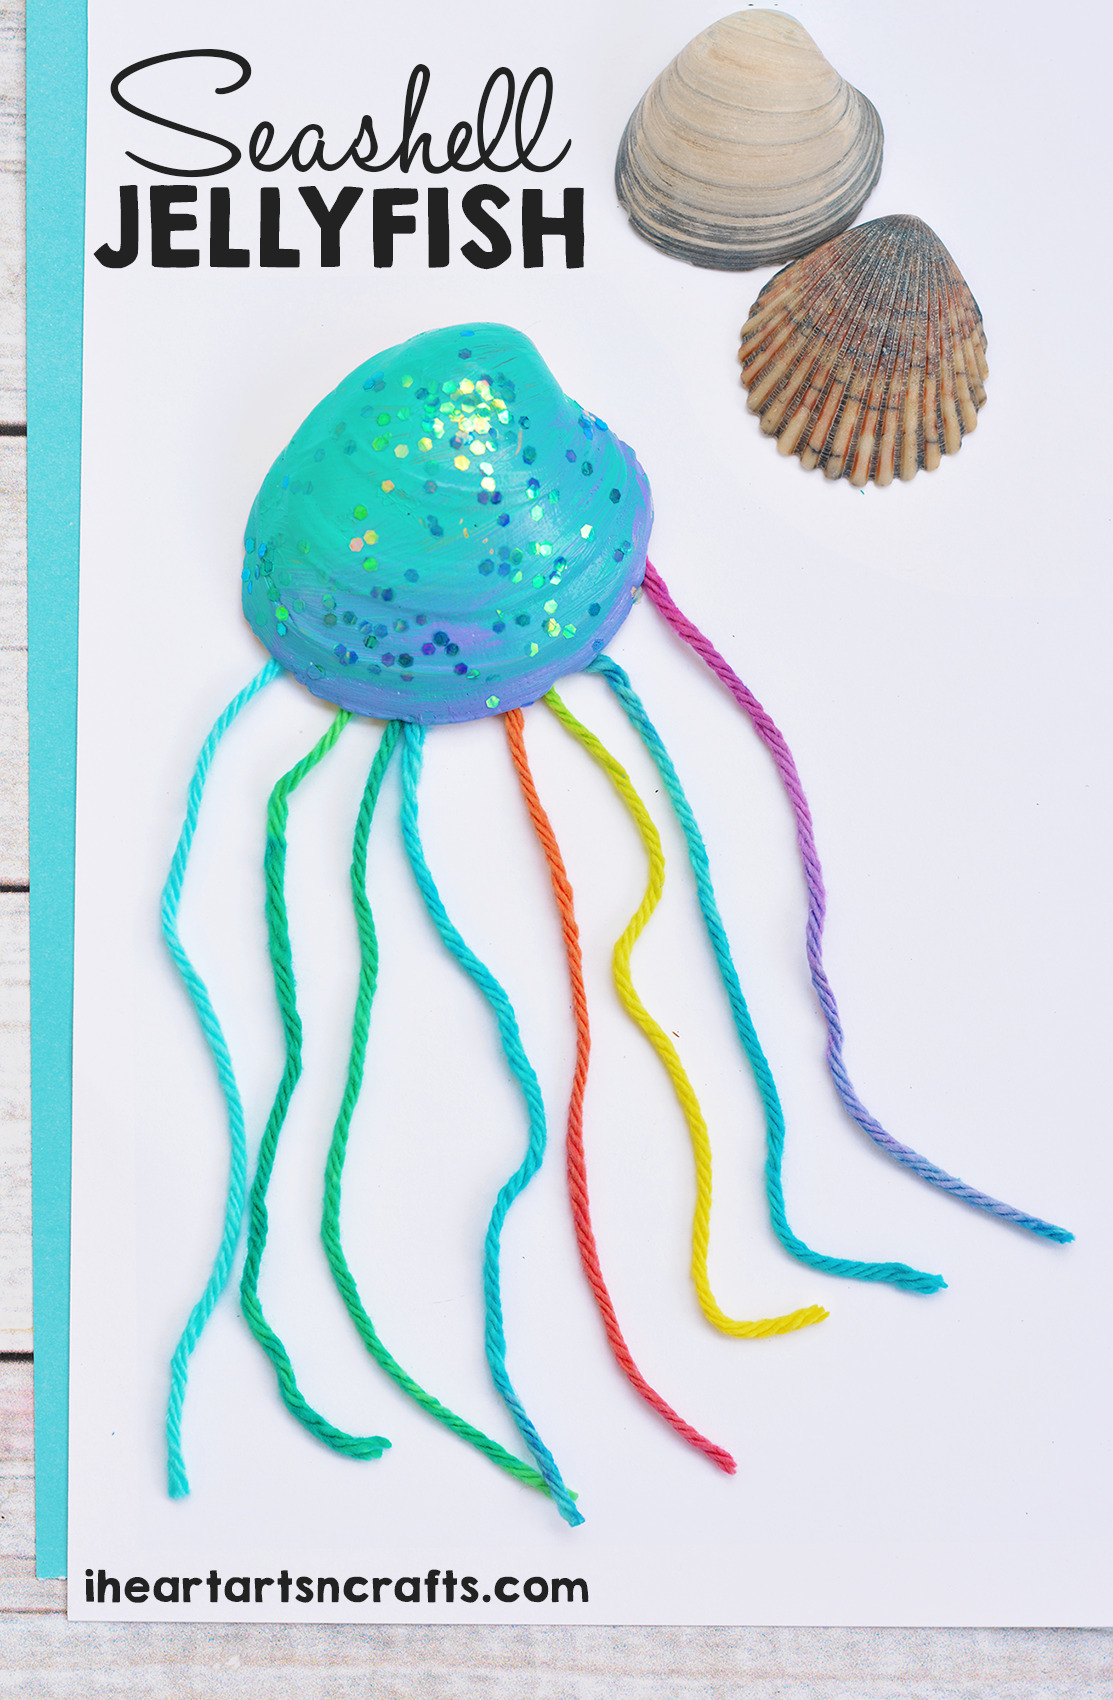 40 Handmade Seashell Crafts Ideas For Adults and Kids